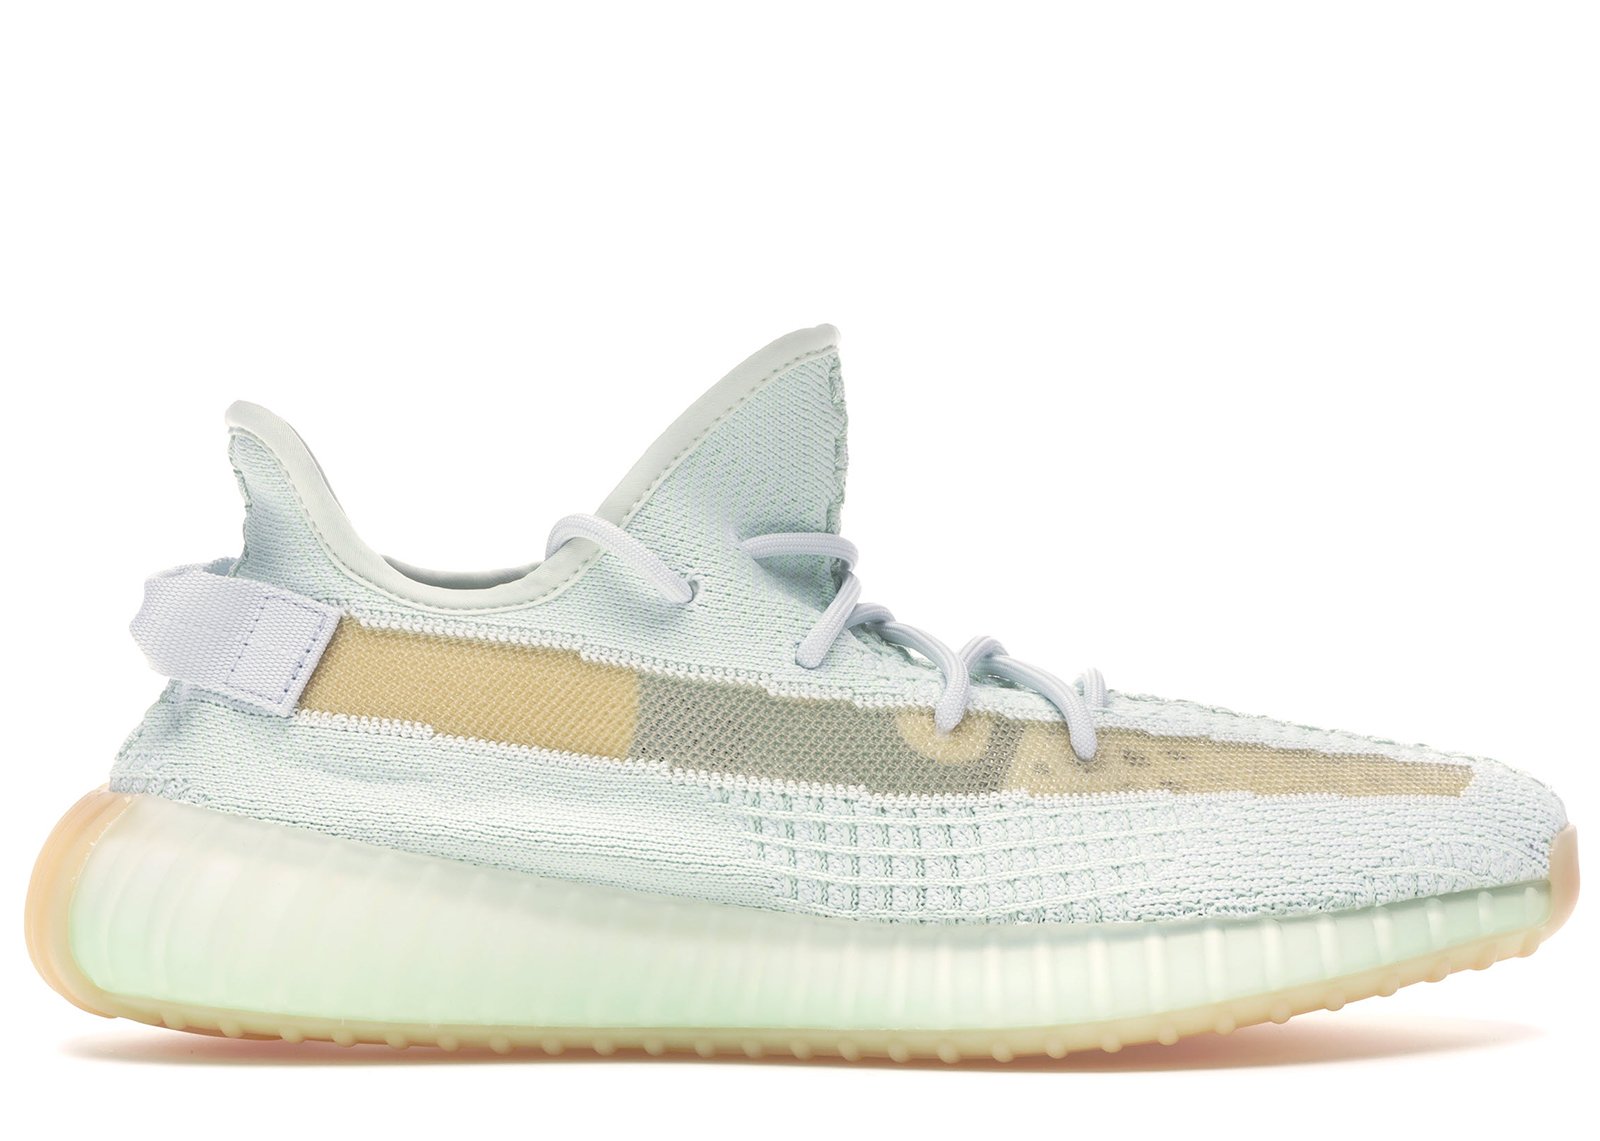 adidas Yeezy Boost 350 V2 Hyperspace sneakers